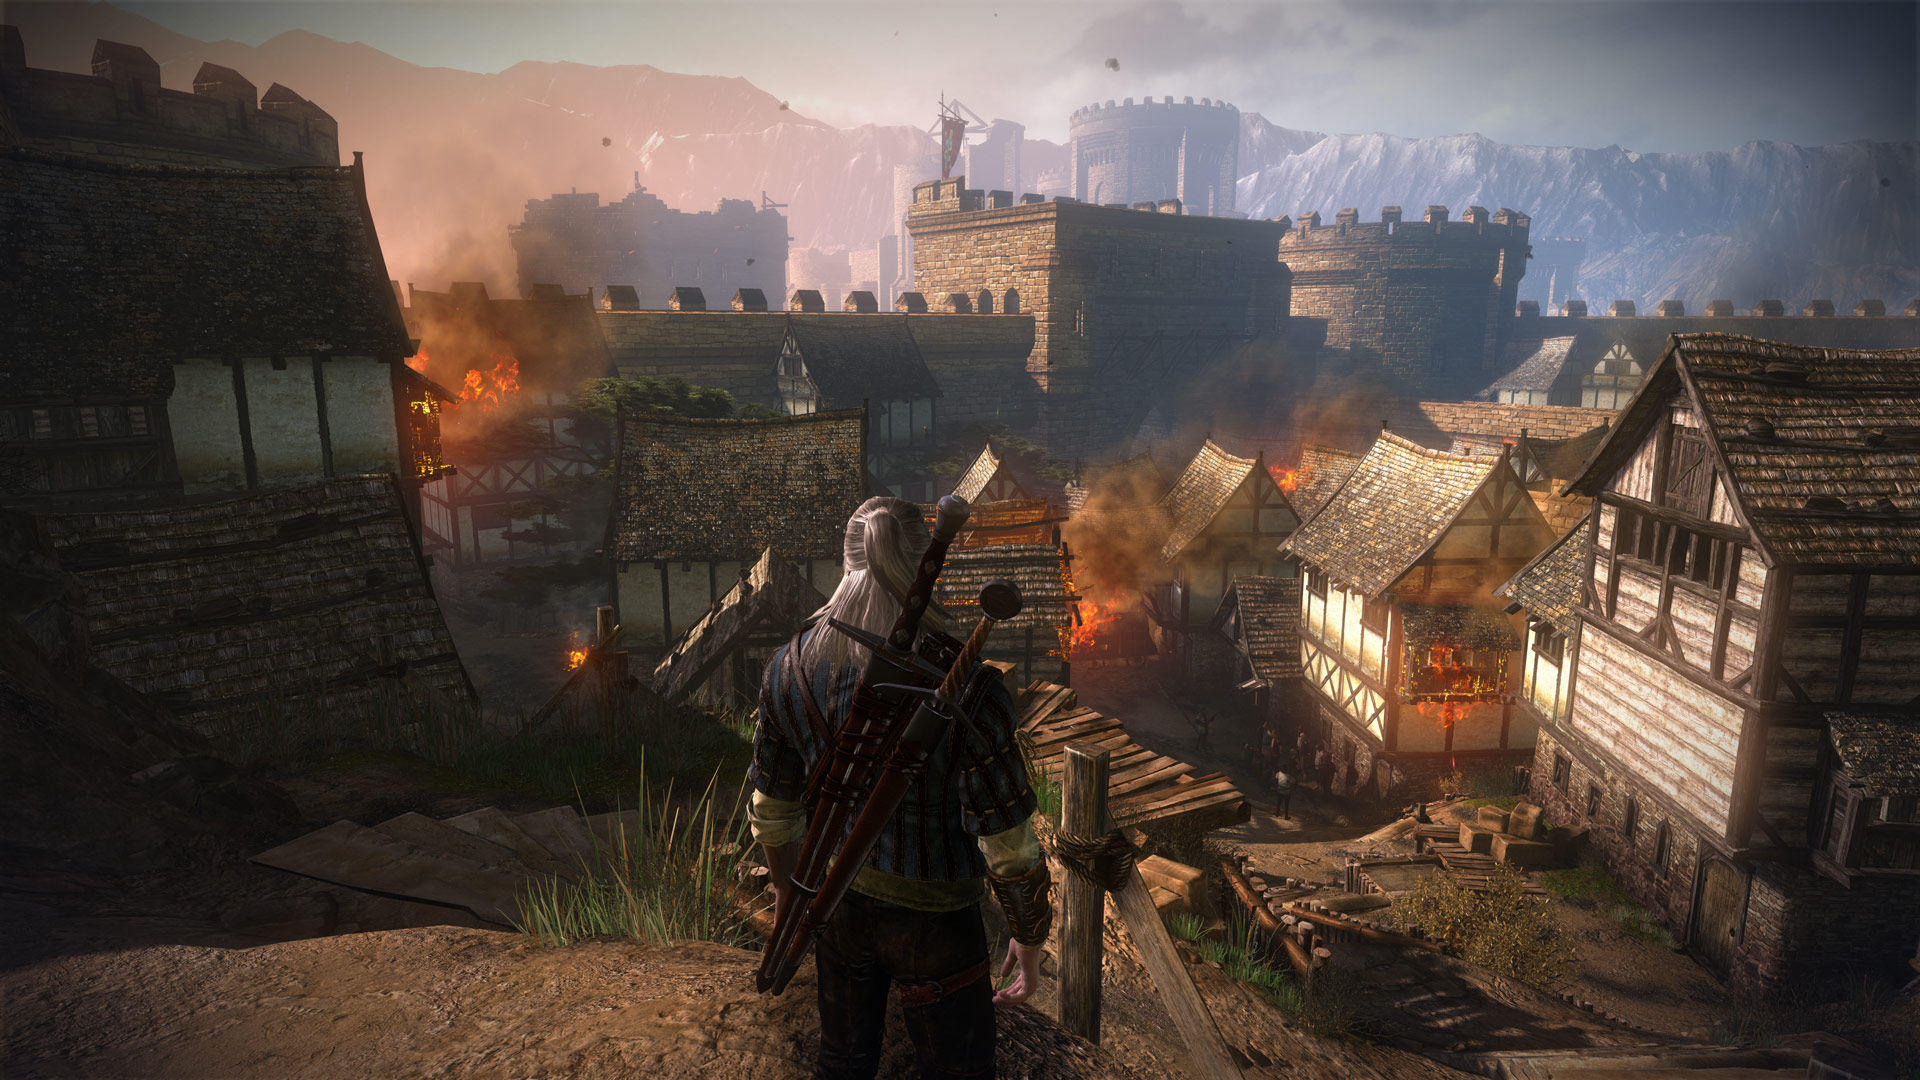 The Witcher 2 - Enhanced Edition Gameplay 